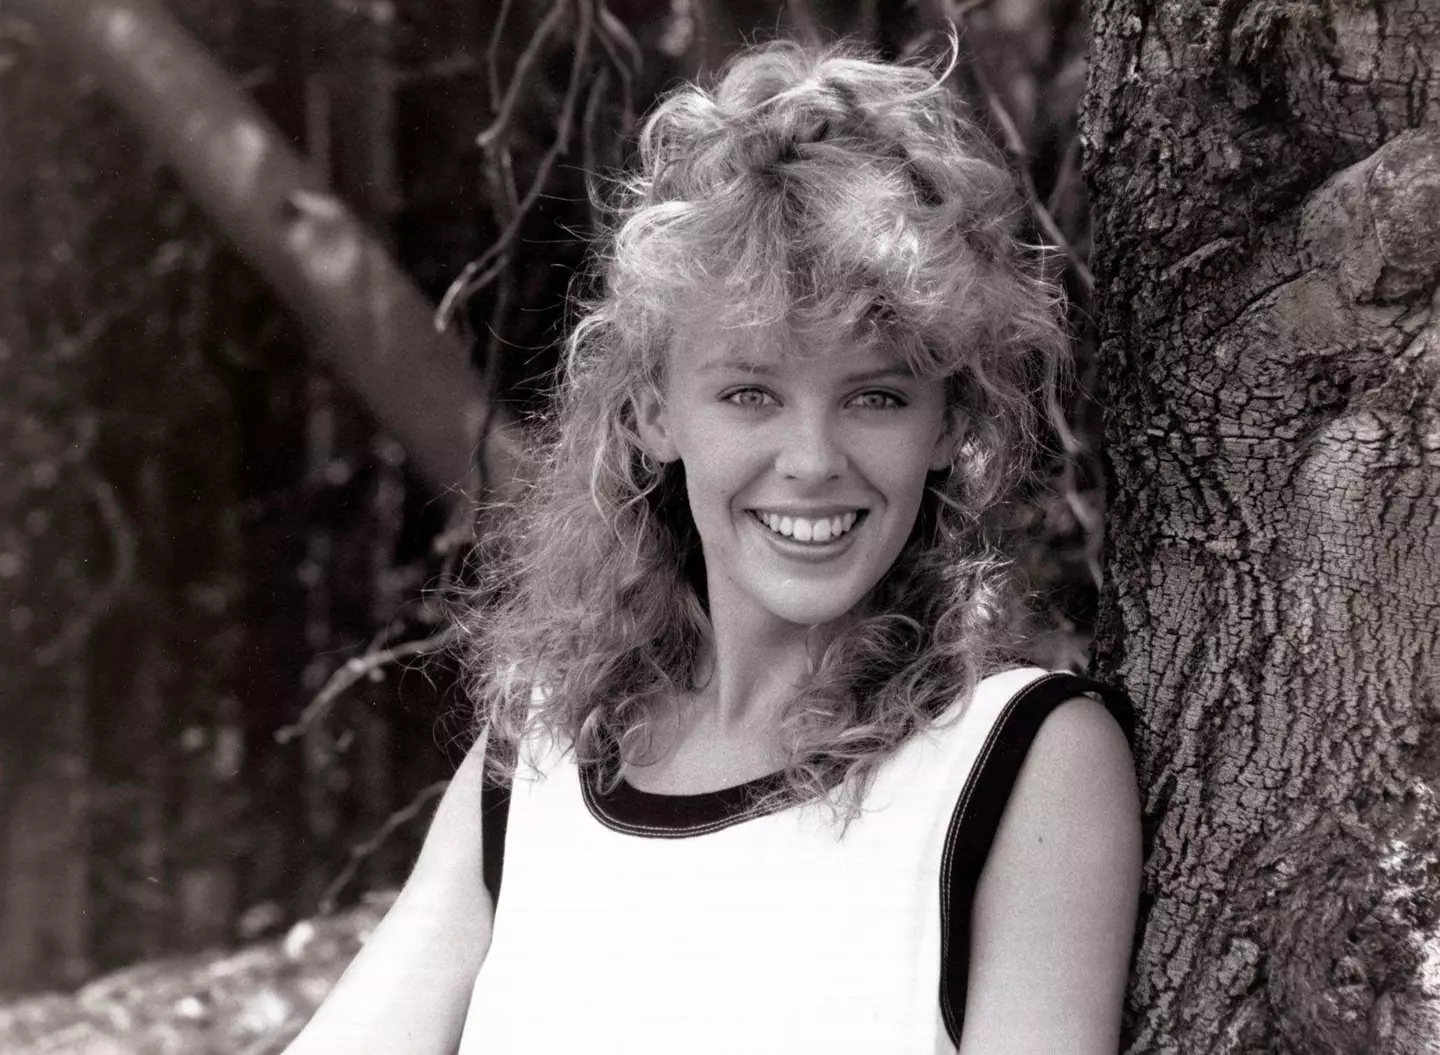 Kylie Minogue in her role as Charlene in the Australian soap opera Neighbours, February 1988.